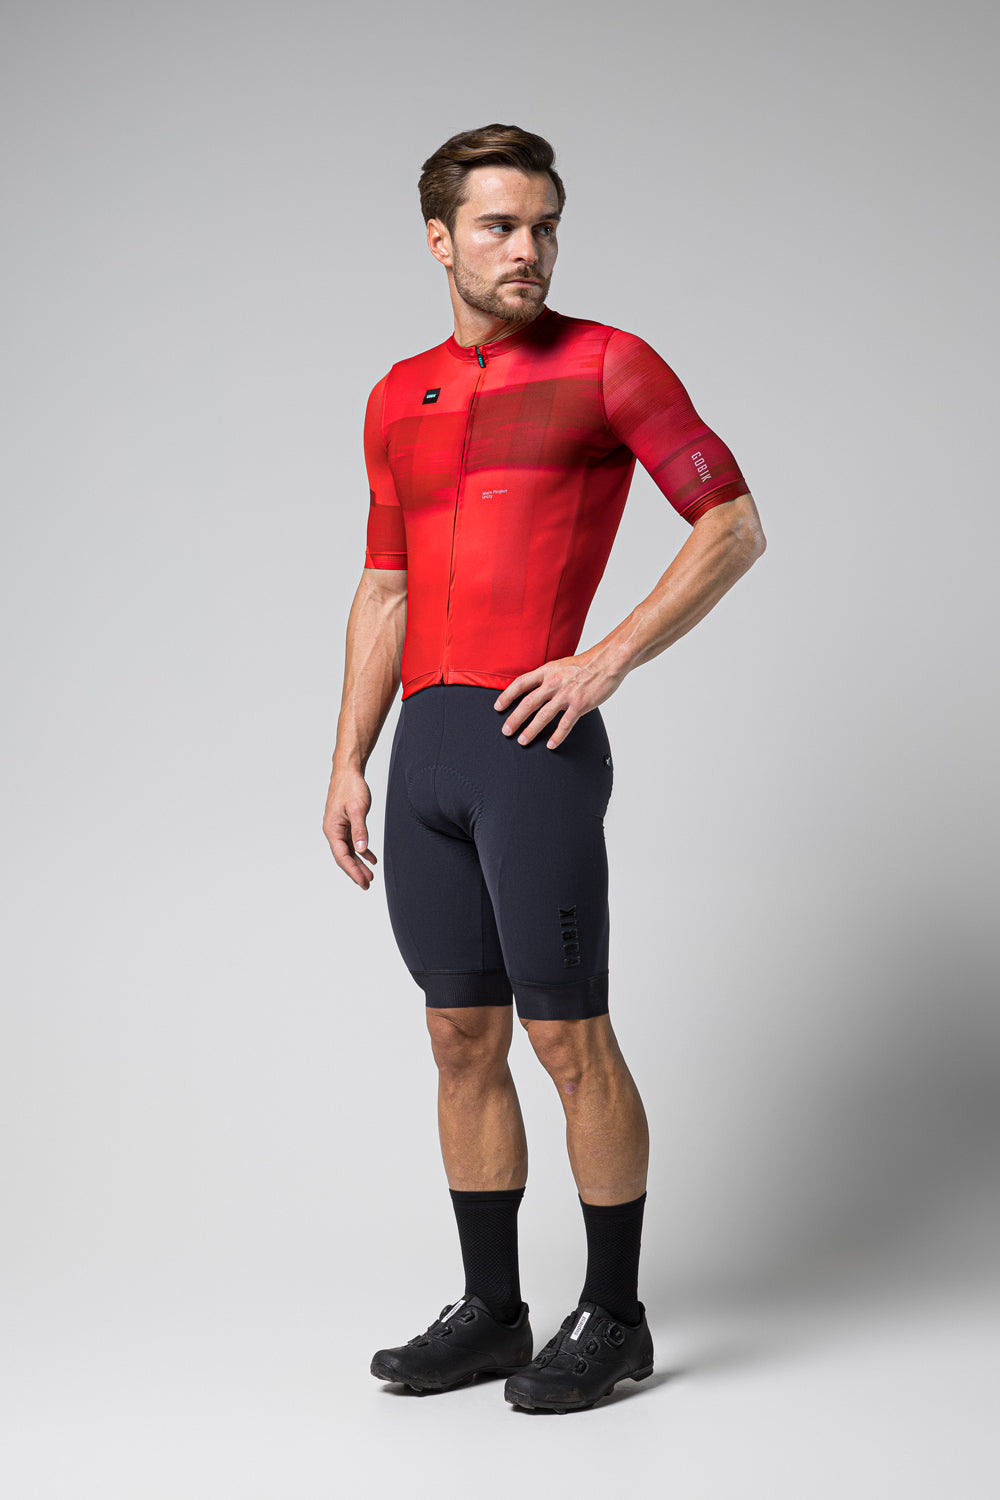 MAILLOT MANCHES COURTES STARK HOMME CHERRY